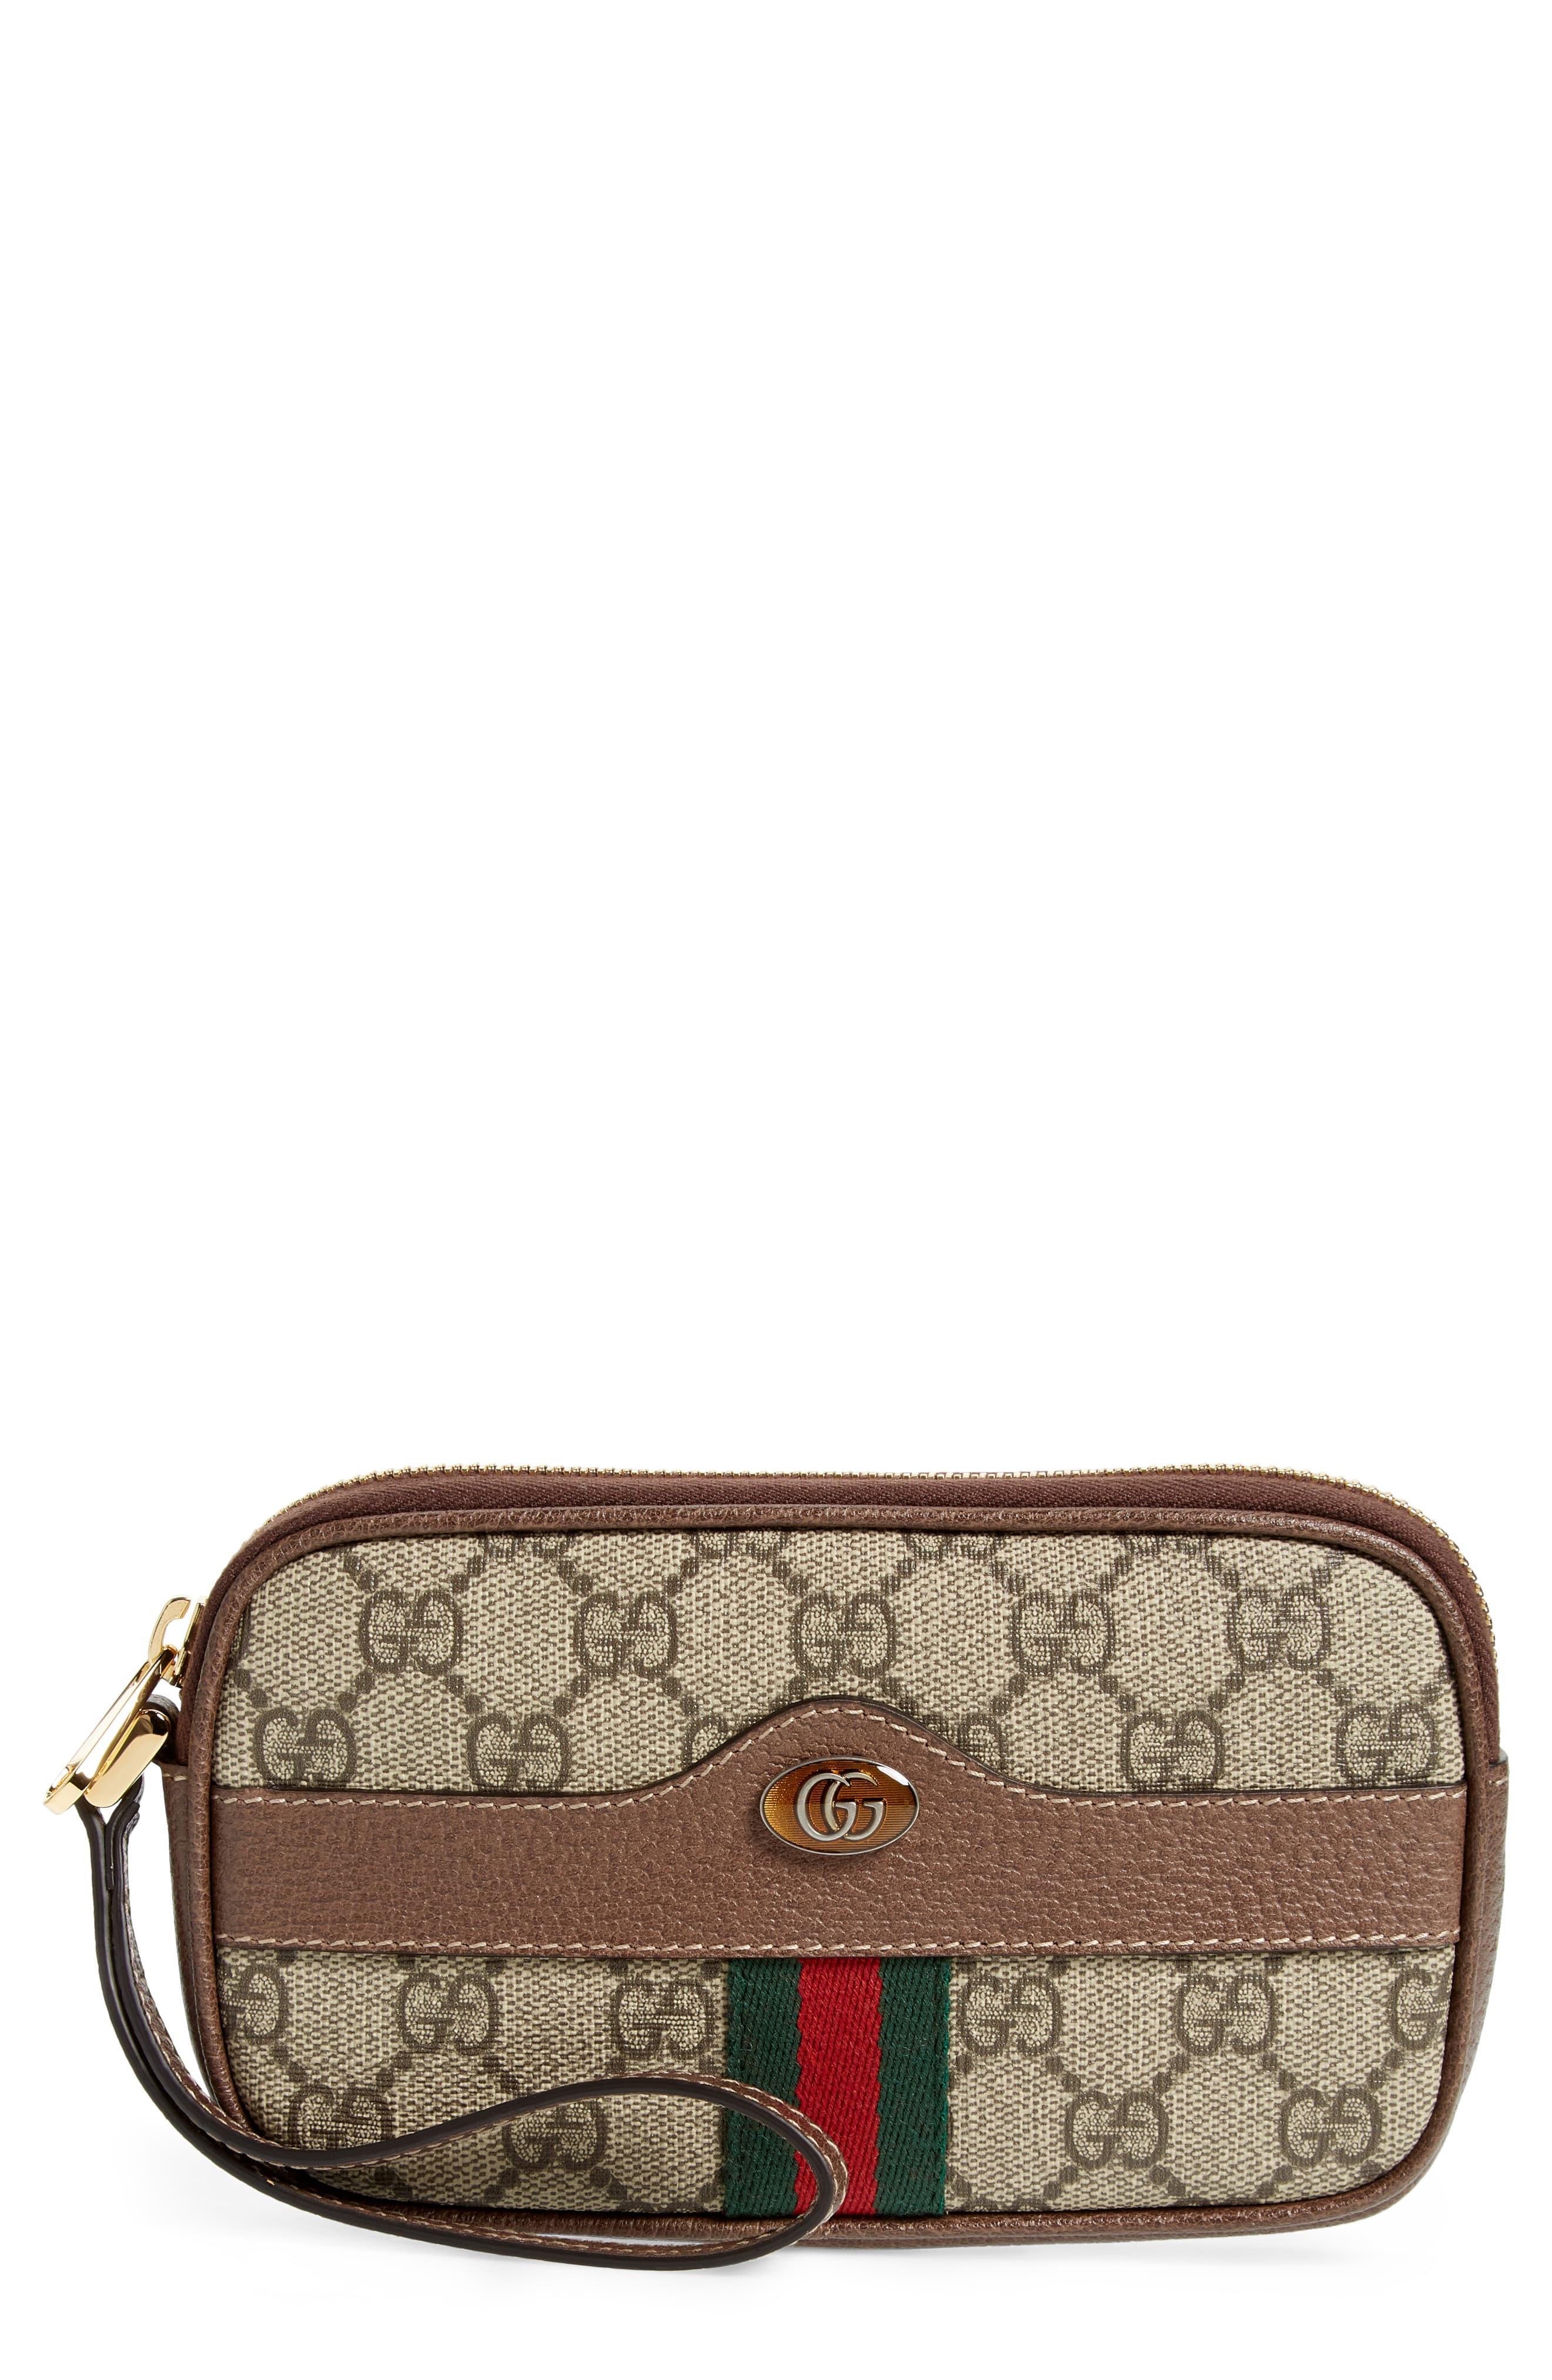 Gucci Ophidia Gg Supreme Canvas Wristlet in Natural - Lyst